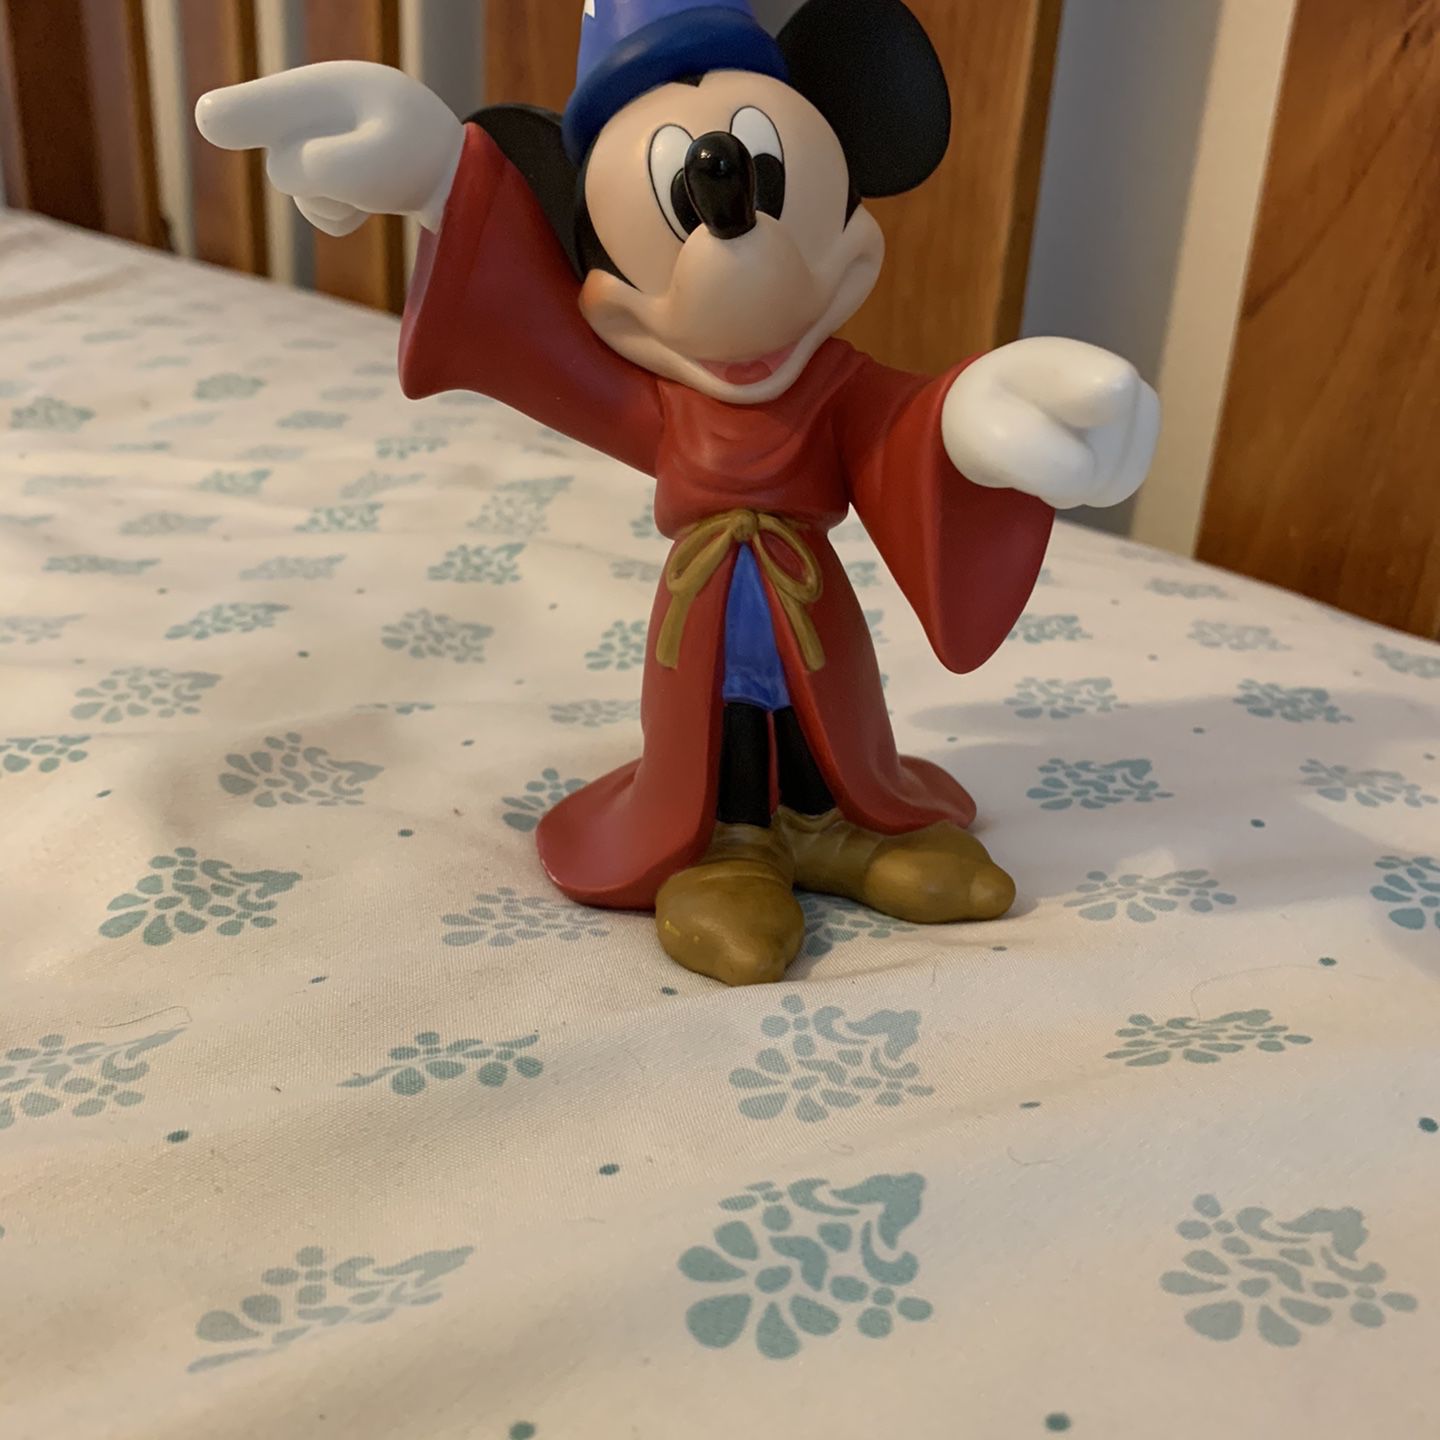 A Collectible Mickey Mouse Statue for a steal!!